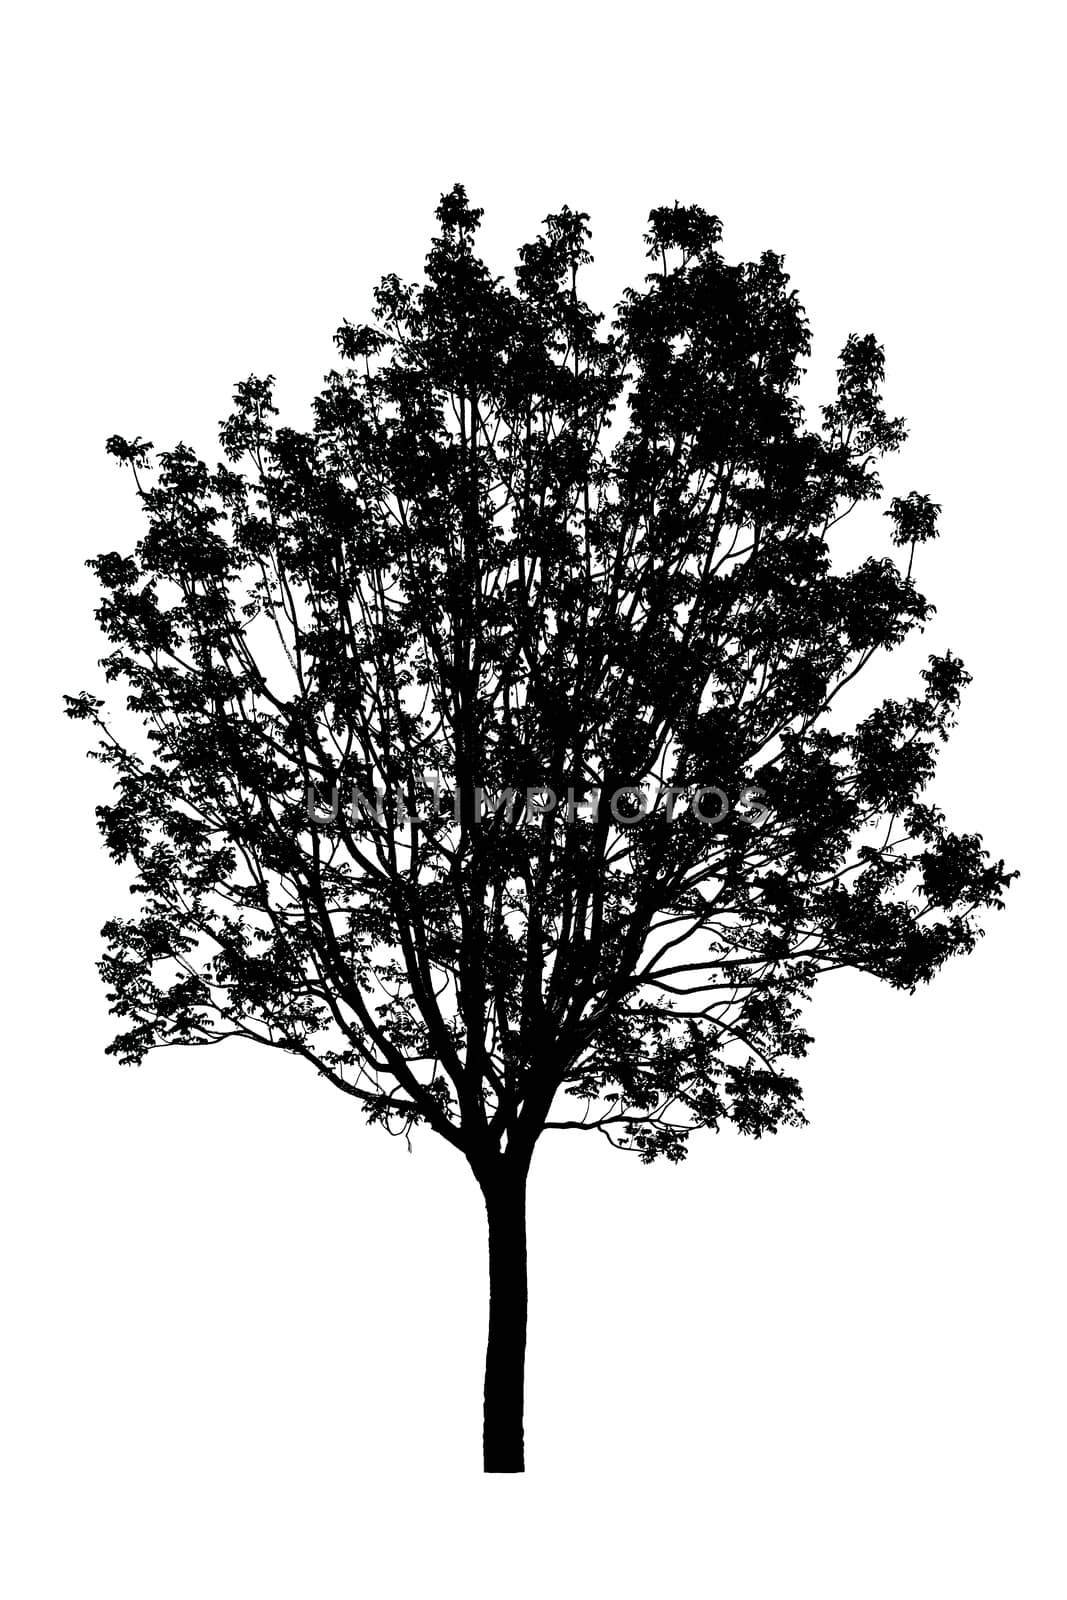 silhouette of tree isolated on white background by rakoptonLPN